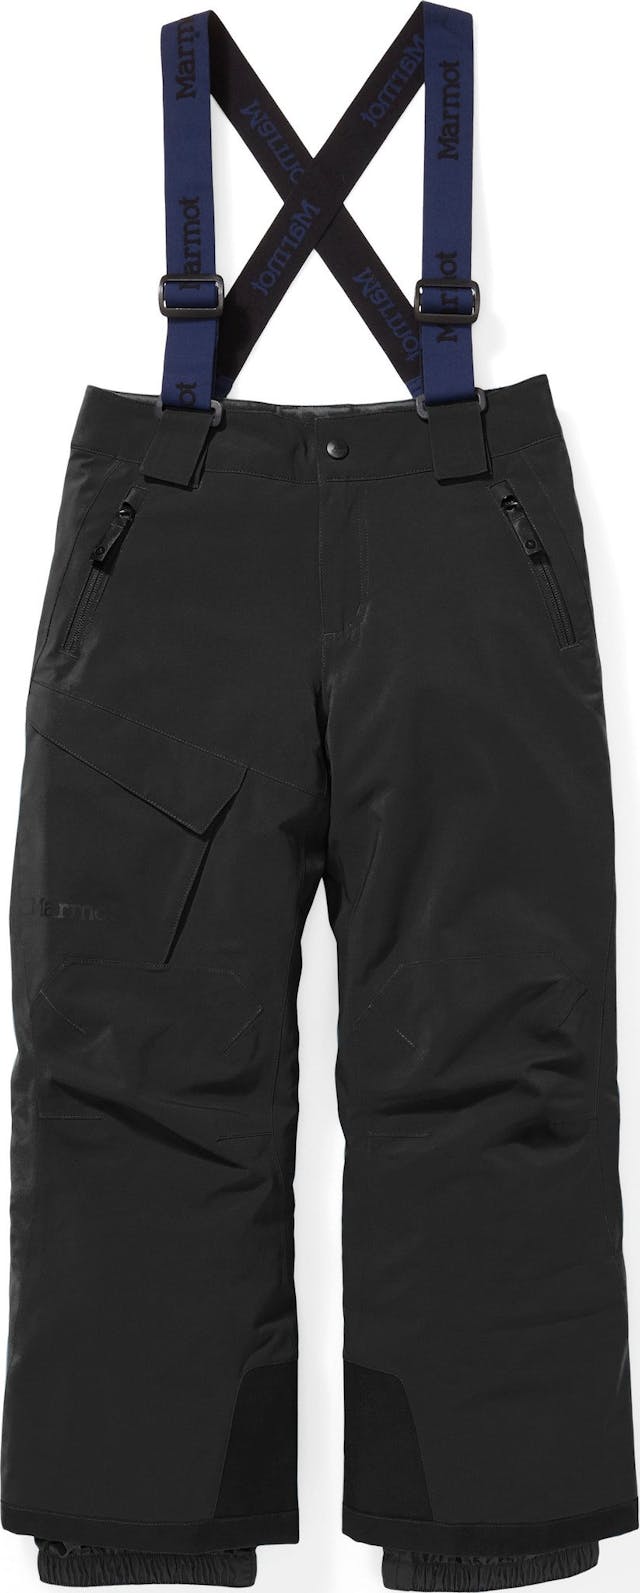 Product image for Edge Insulated Pant - Kids